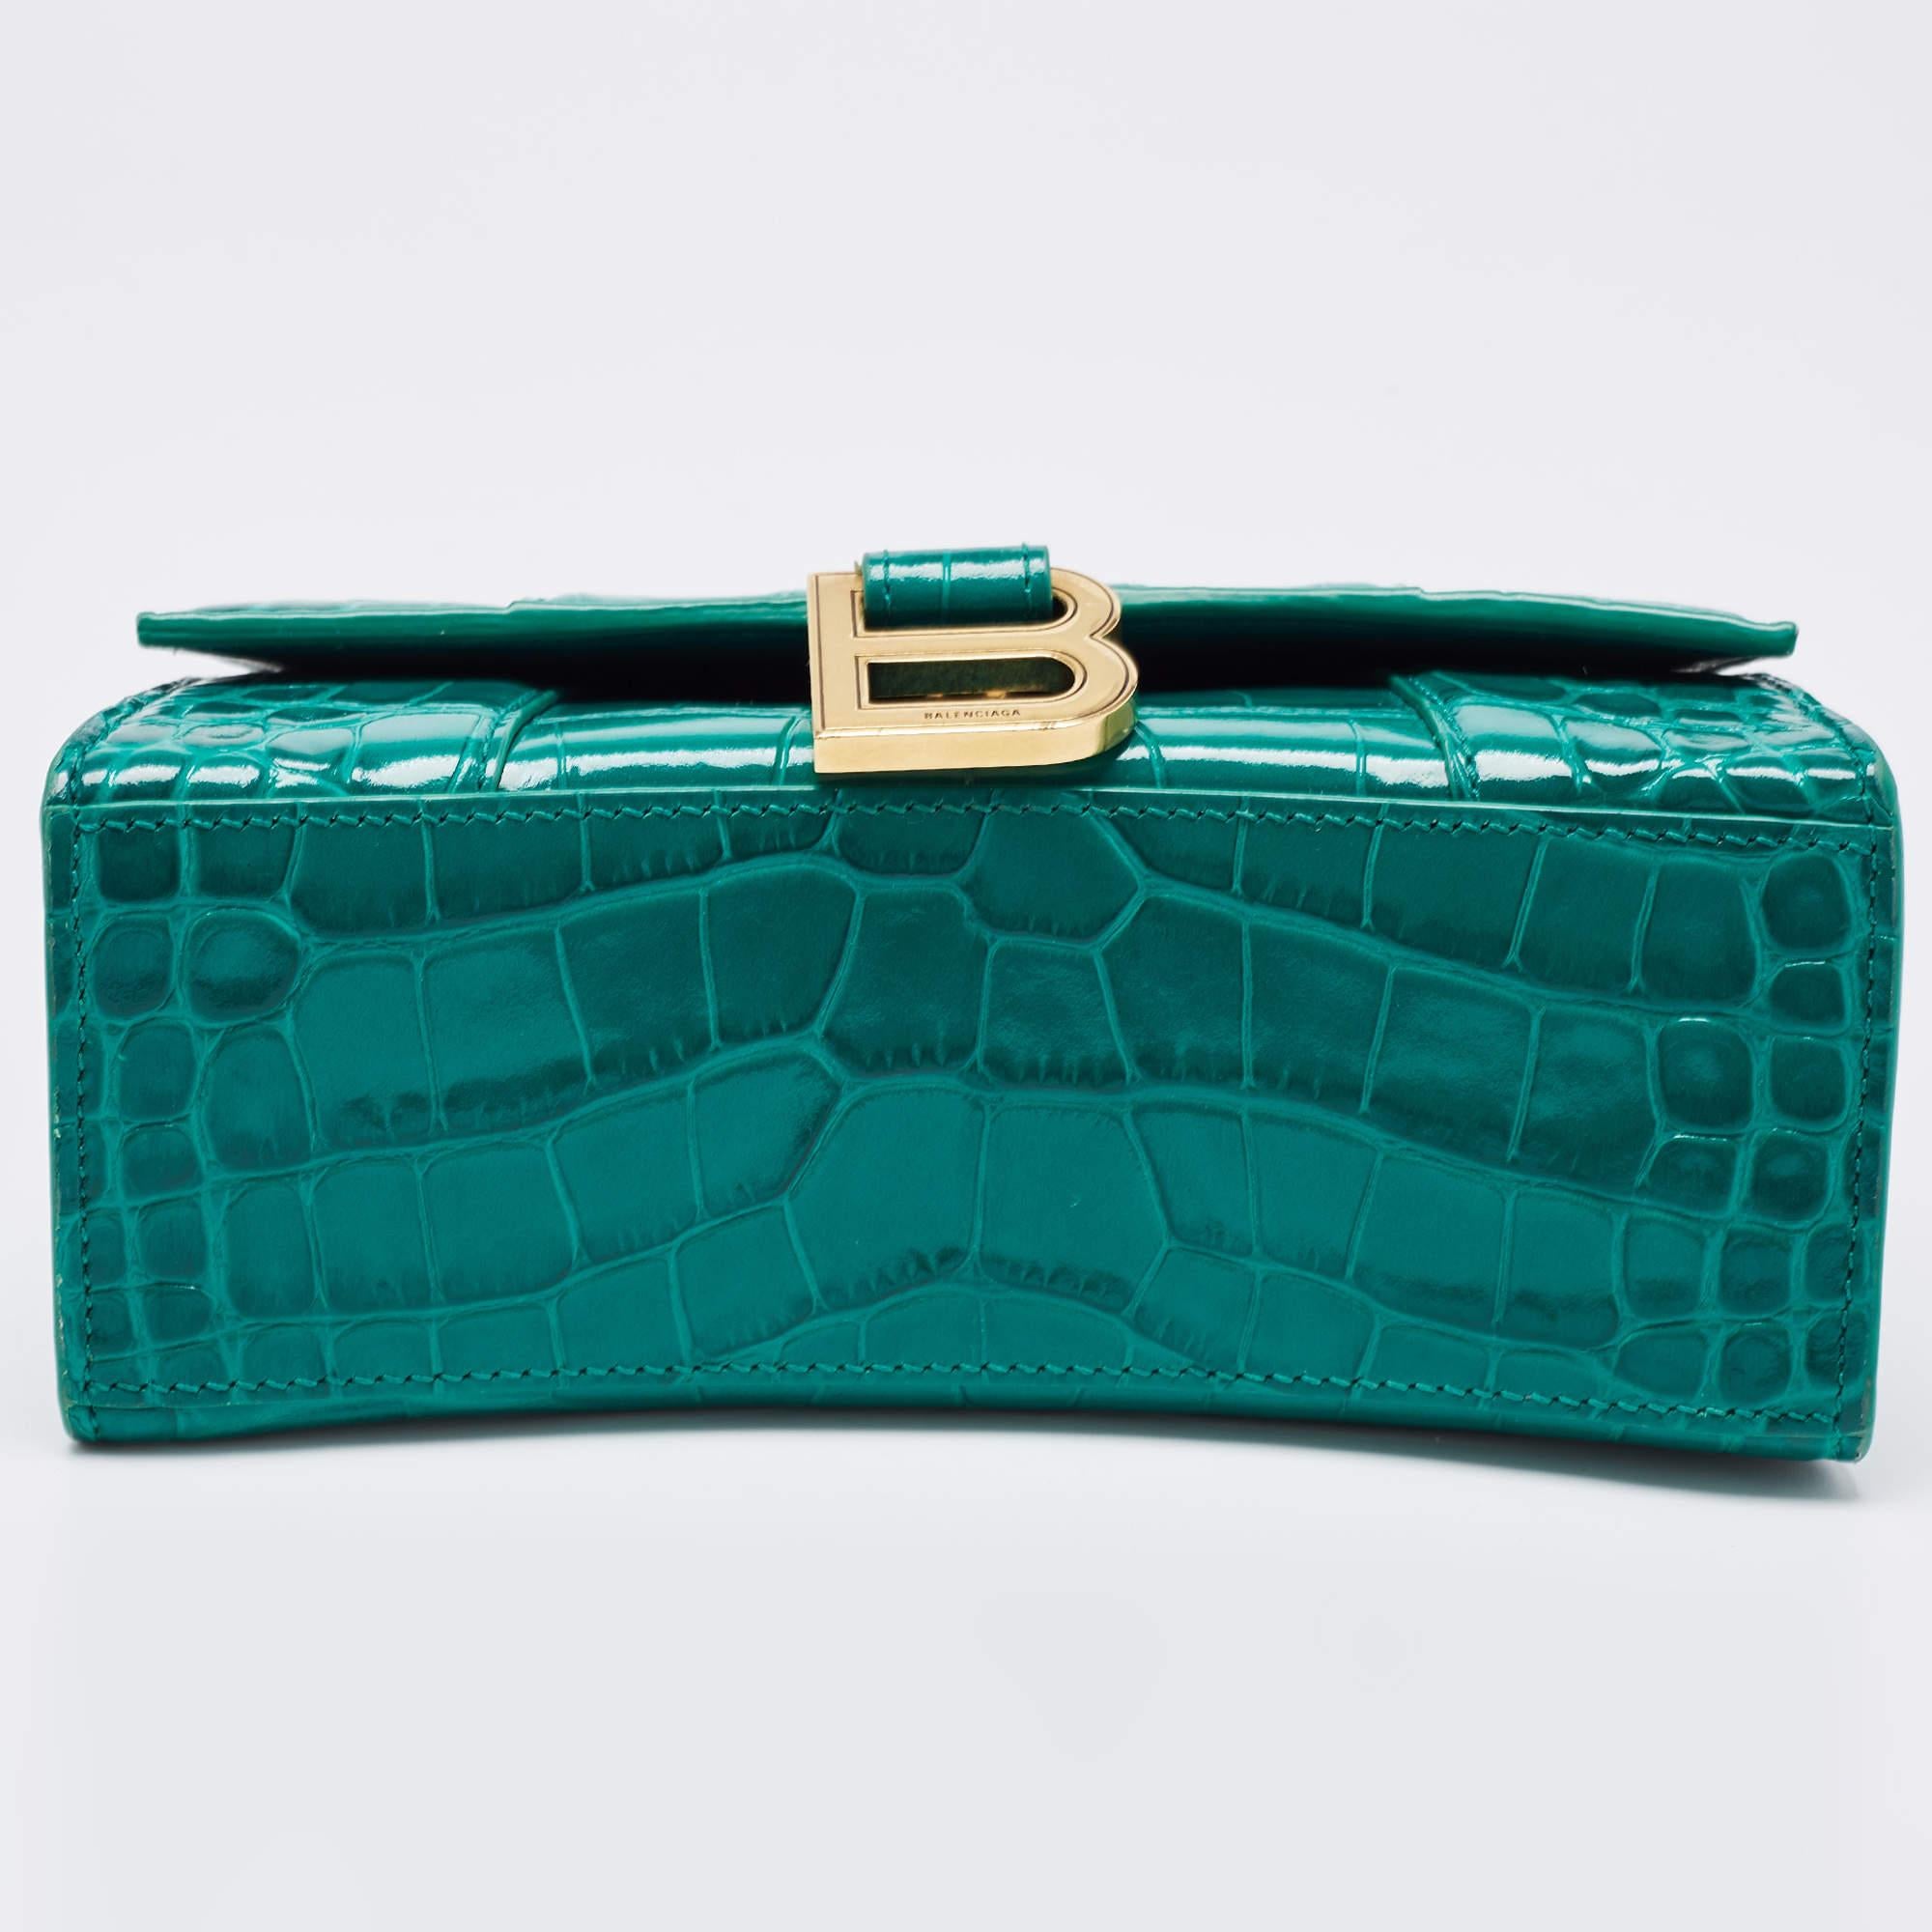 Balenciaga Green Croc Embossed Leather XS Hourglass Top Handle Bag For Sale 1